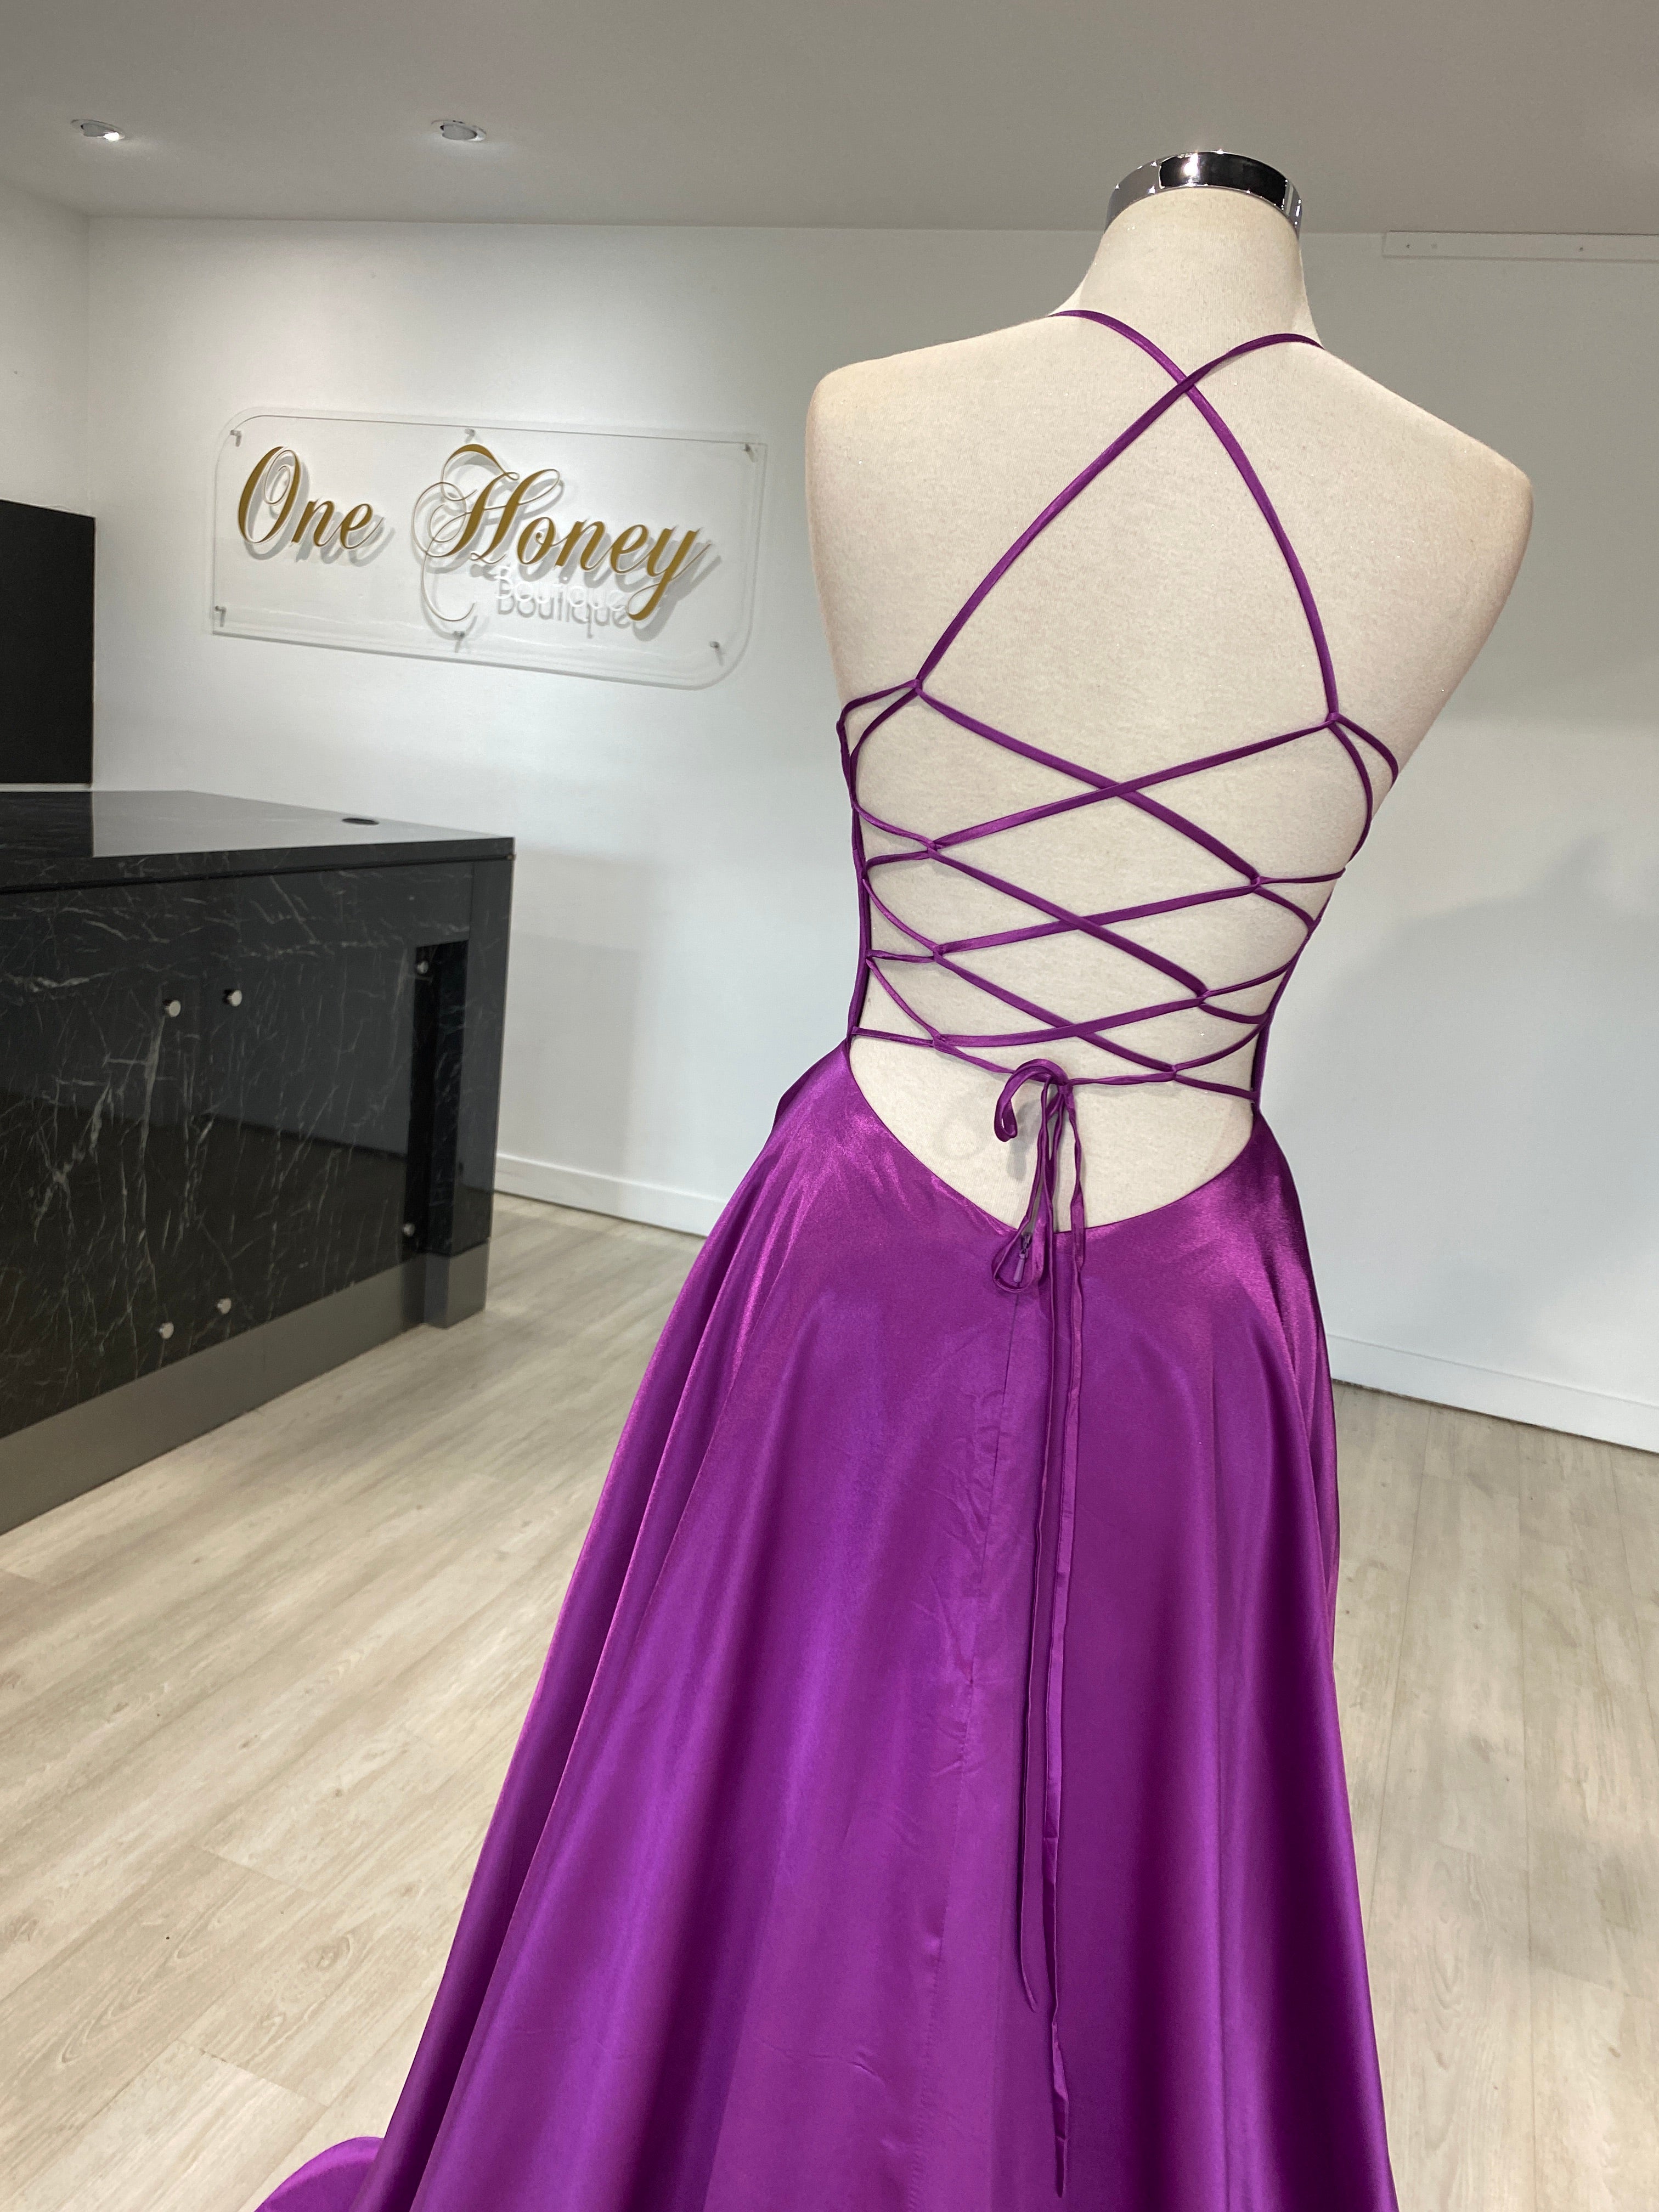 Honey Couture LUCINDA Lace Up Back Satin A Line Formal Dress